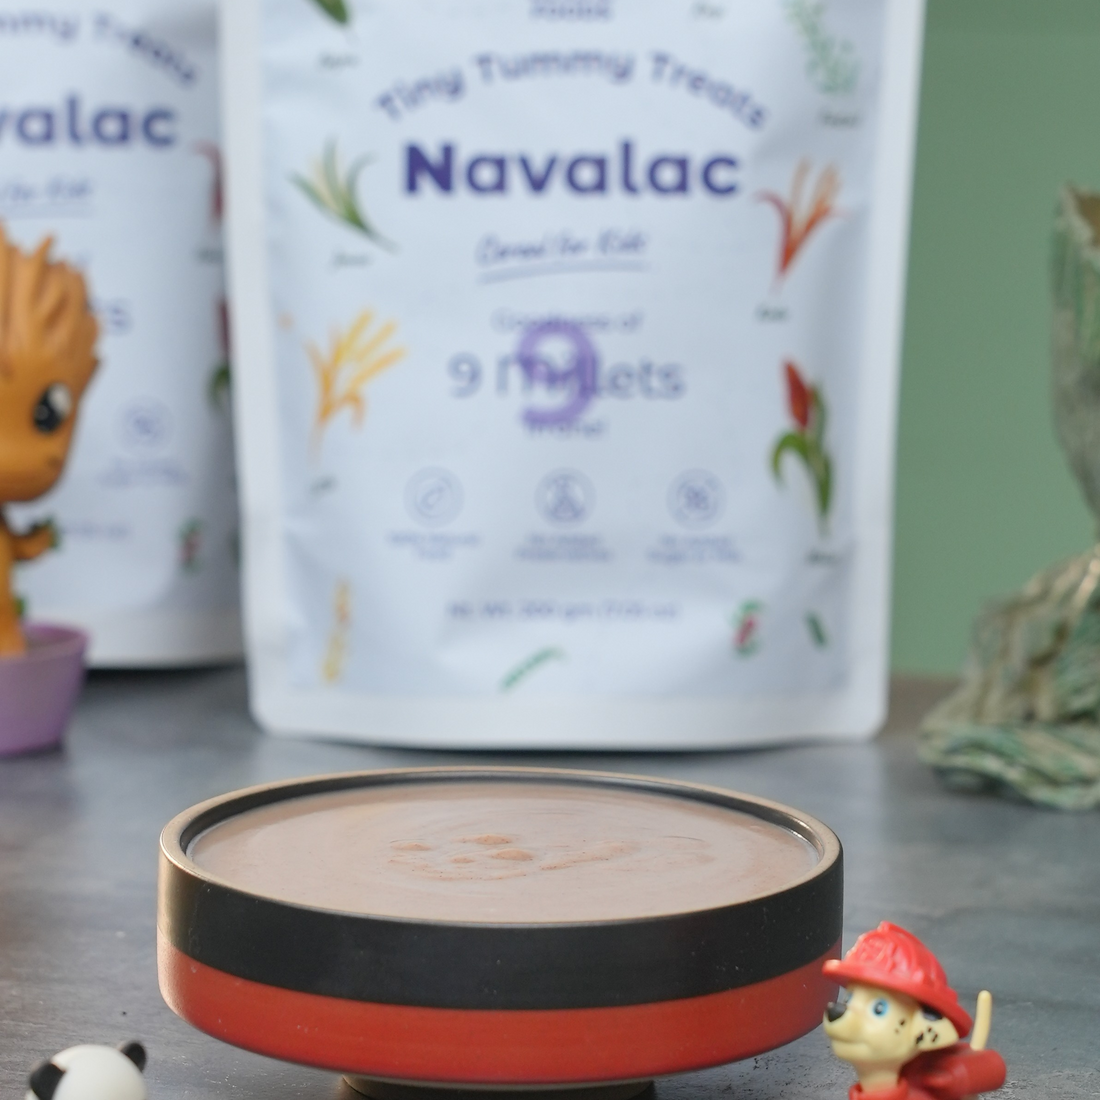 Navalac- Good Source Of Fiber with Essential Nutrients